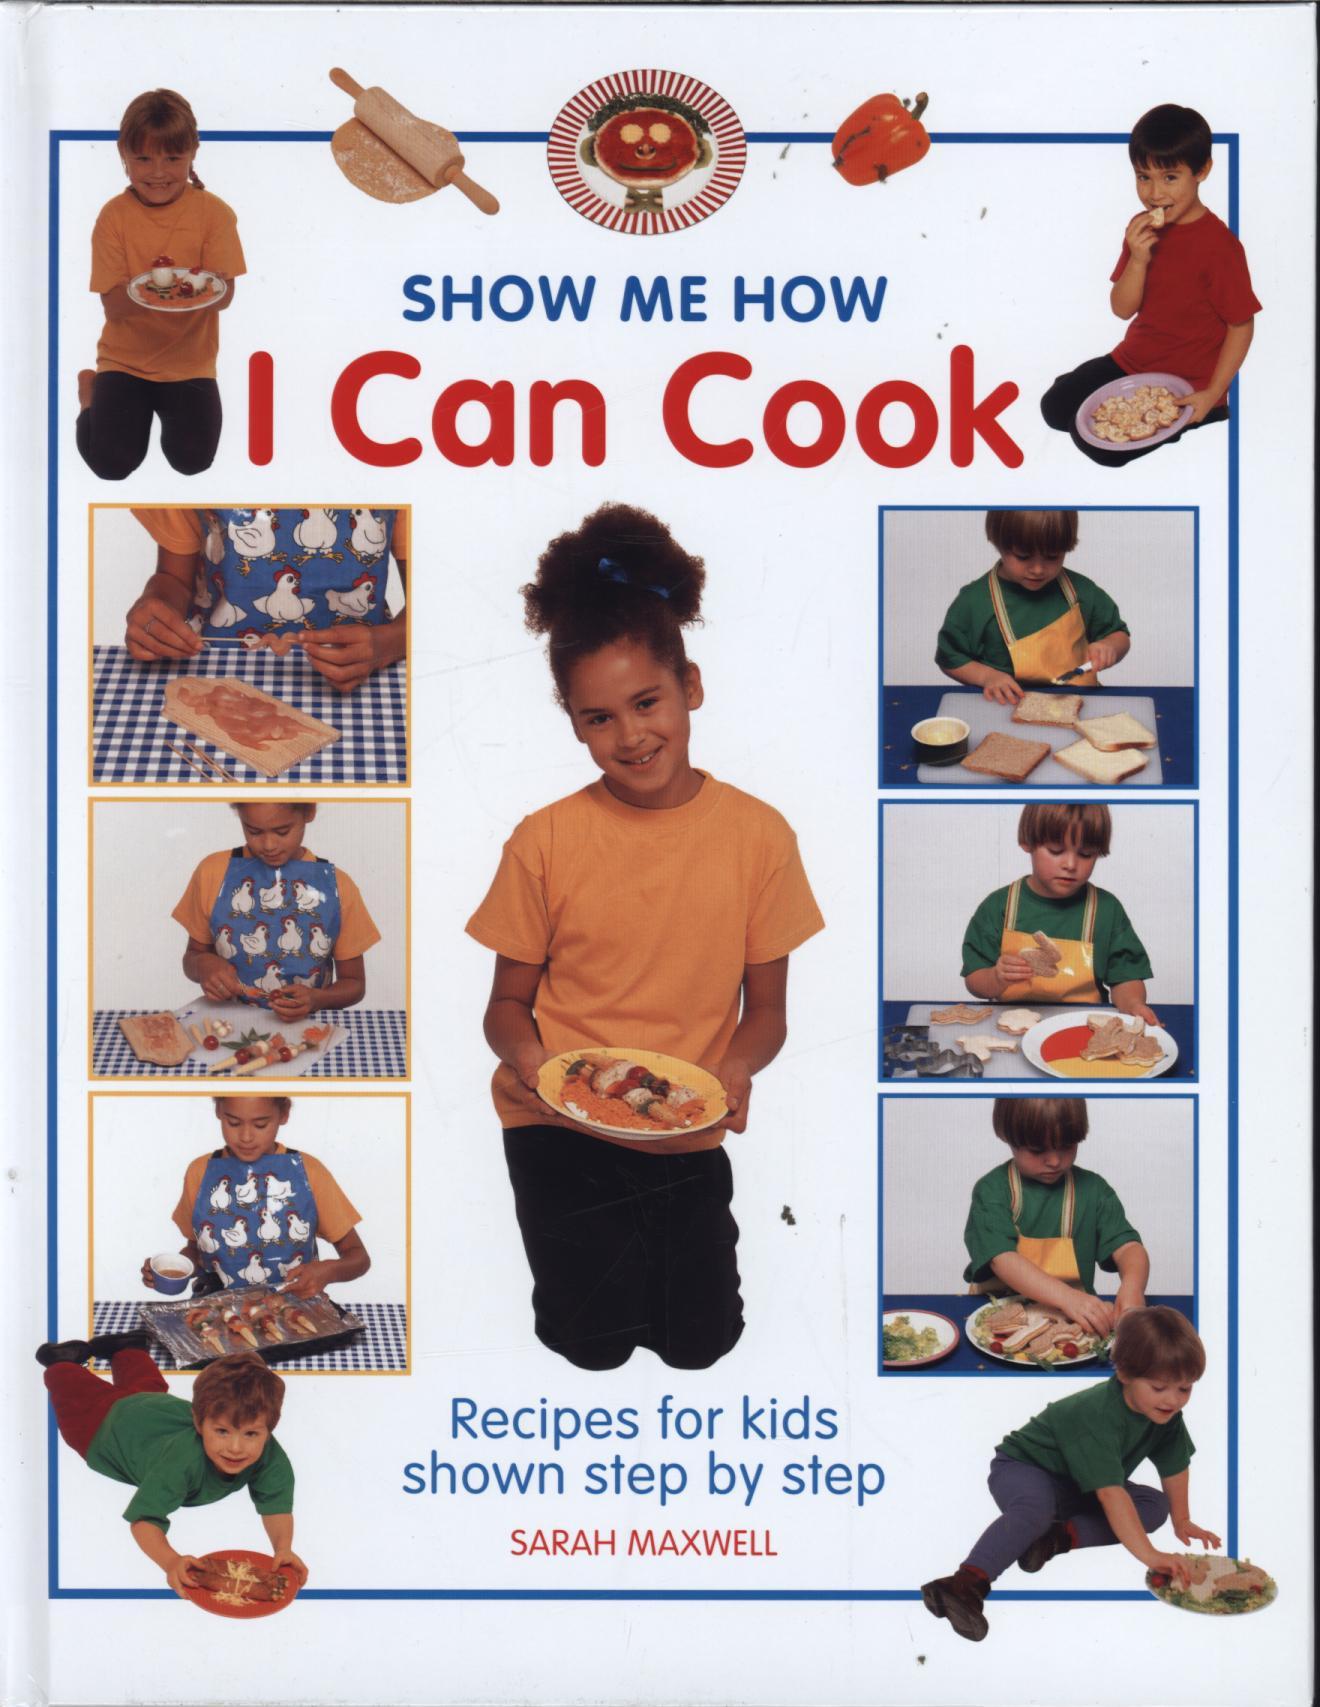 Show Me How: I Can Cook - Sarah Maxwell